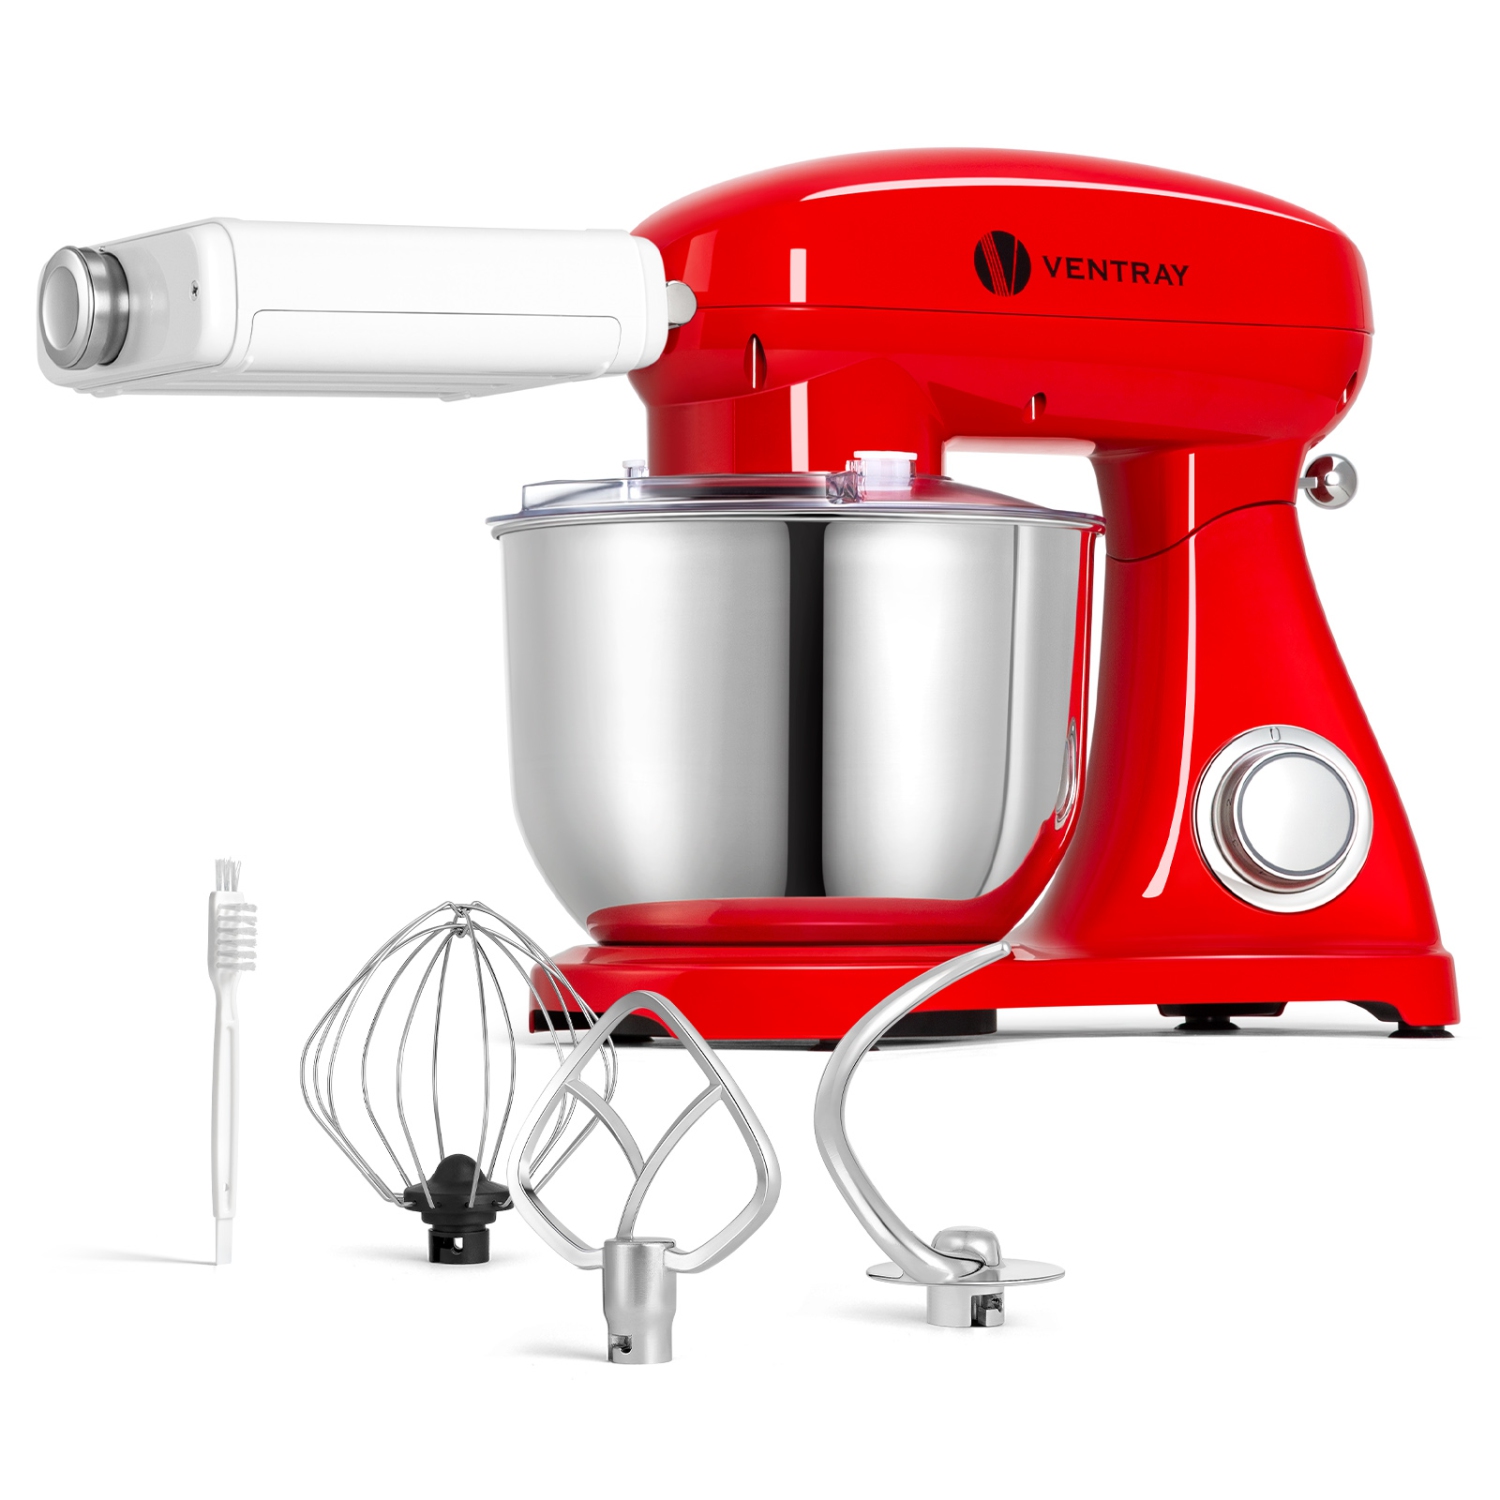 VENTRAY Stand Mixer and 3-in-1 Pasta Maker Bundle - Red